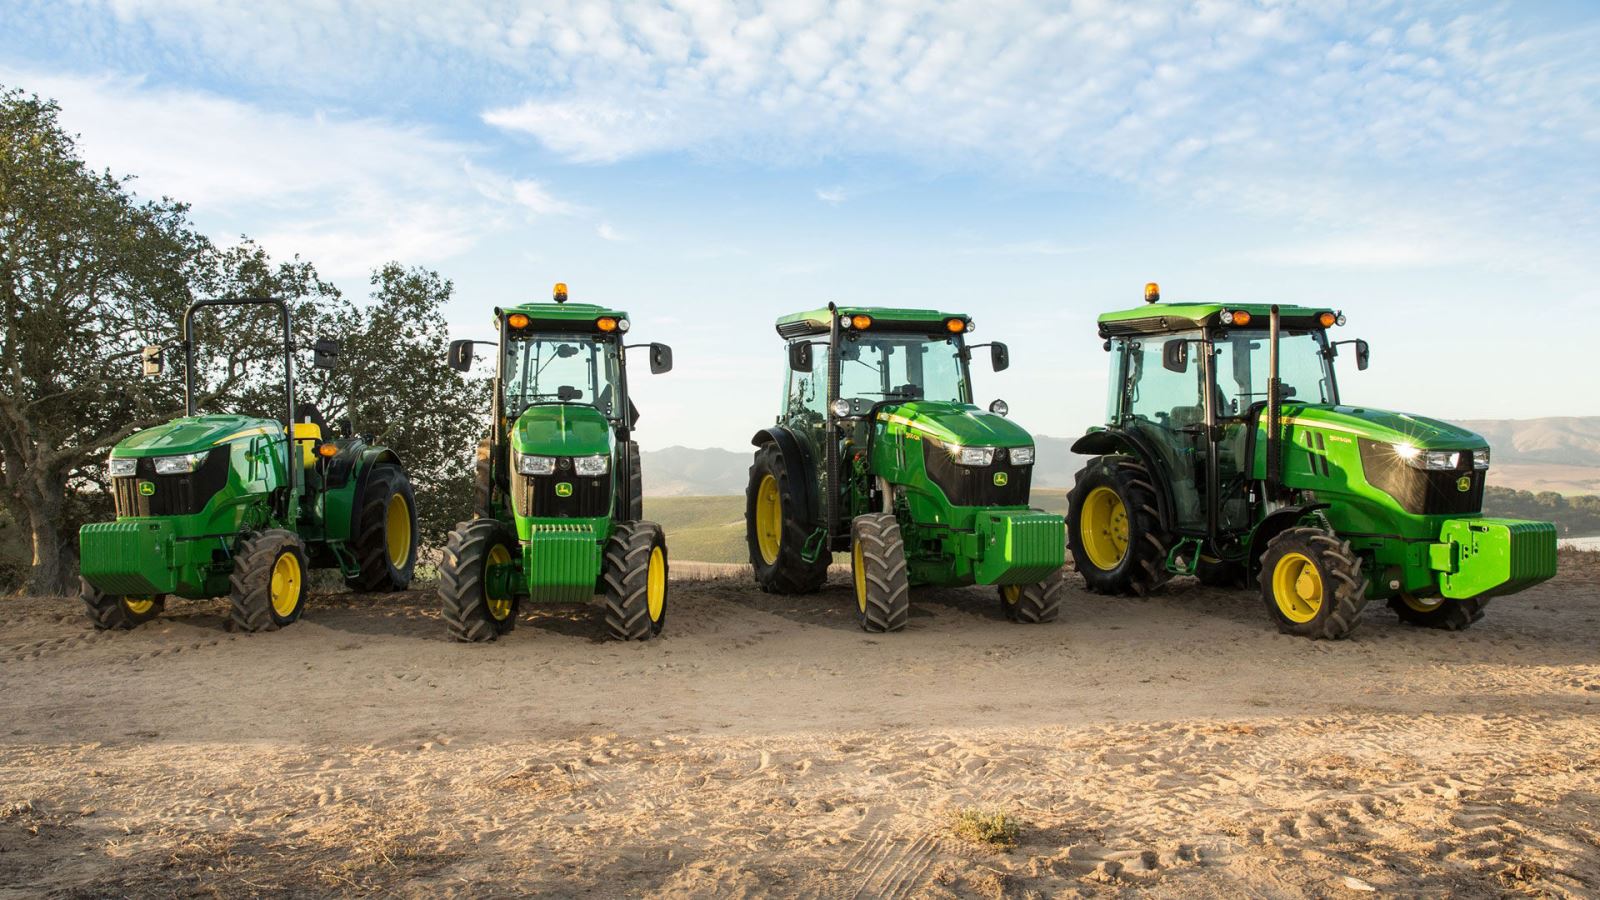 SAME focuses on specialized tractors and utilities